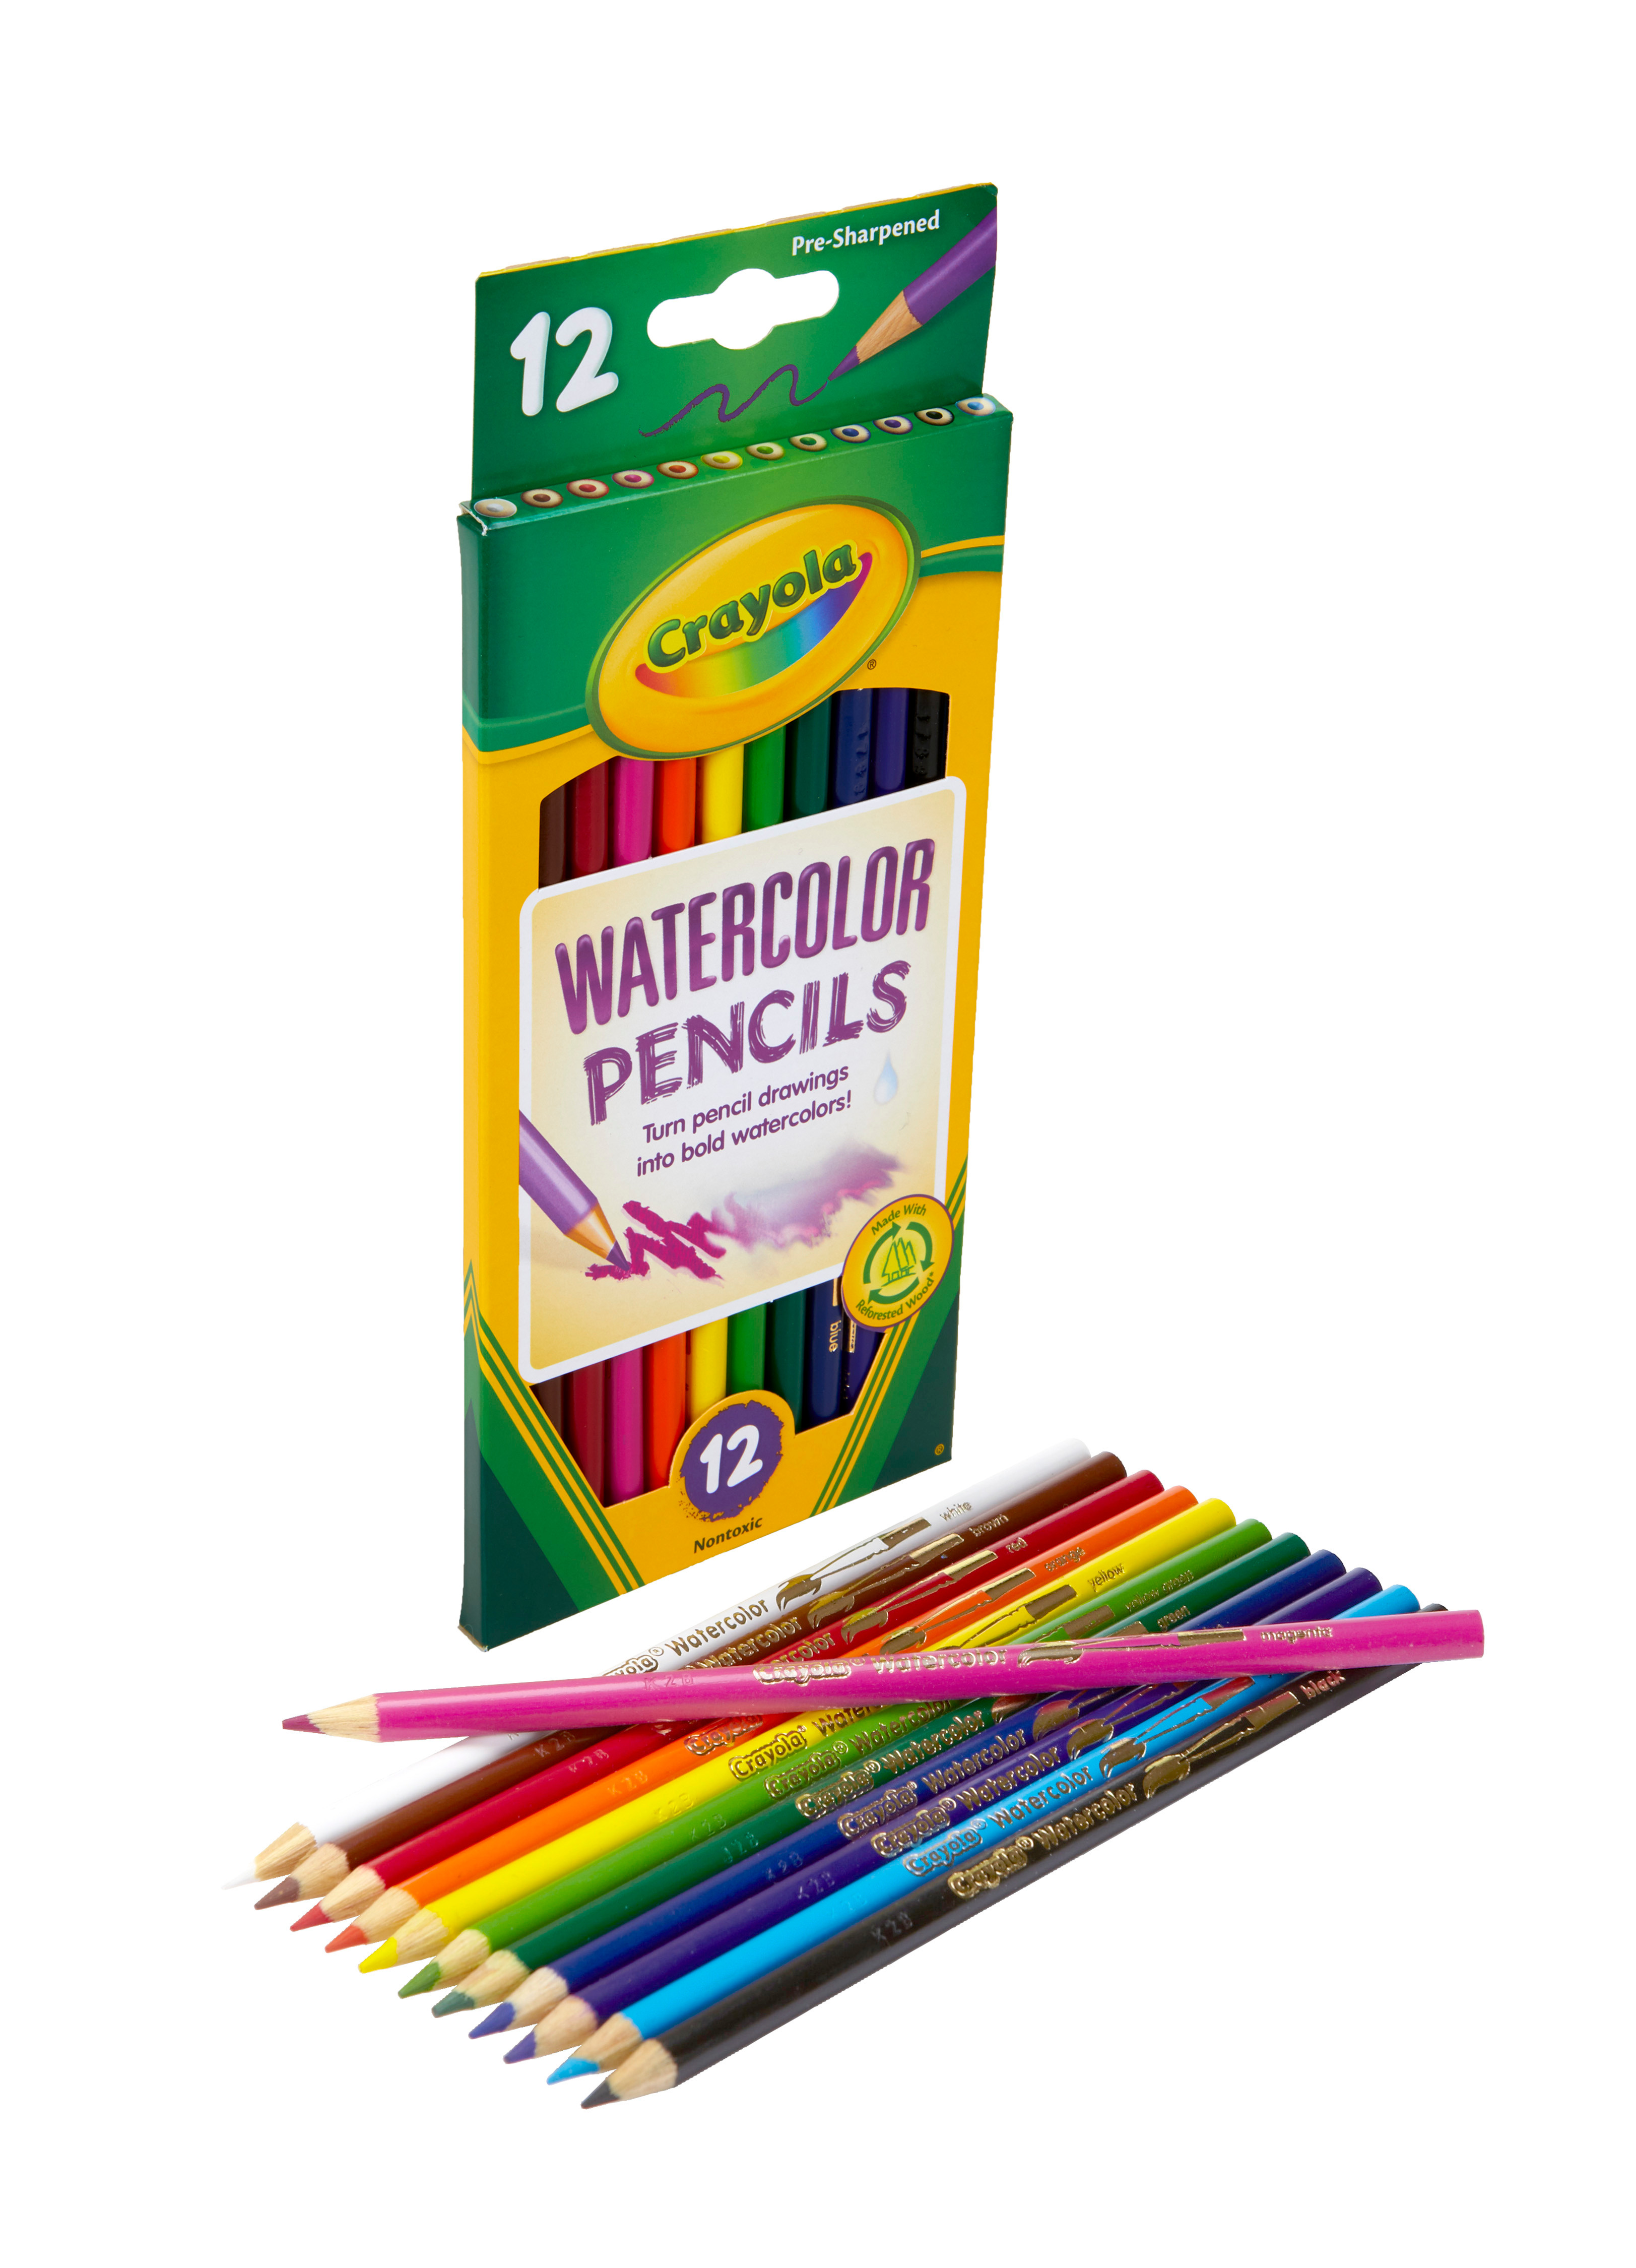 Crayola Watercolor Colored Pencils, 12 Count Use Wet or Dry - image 3 of 10